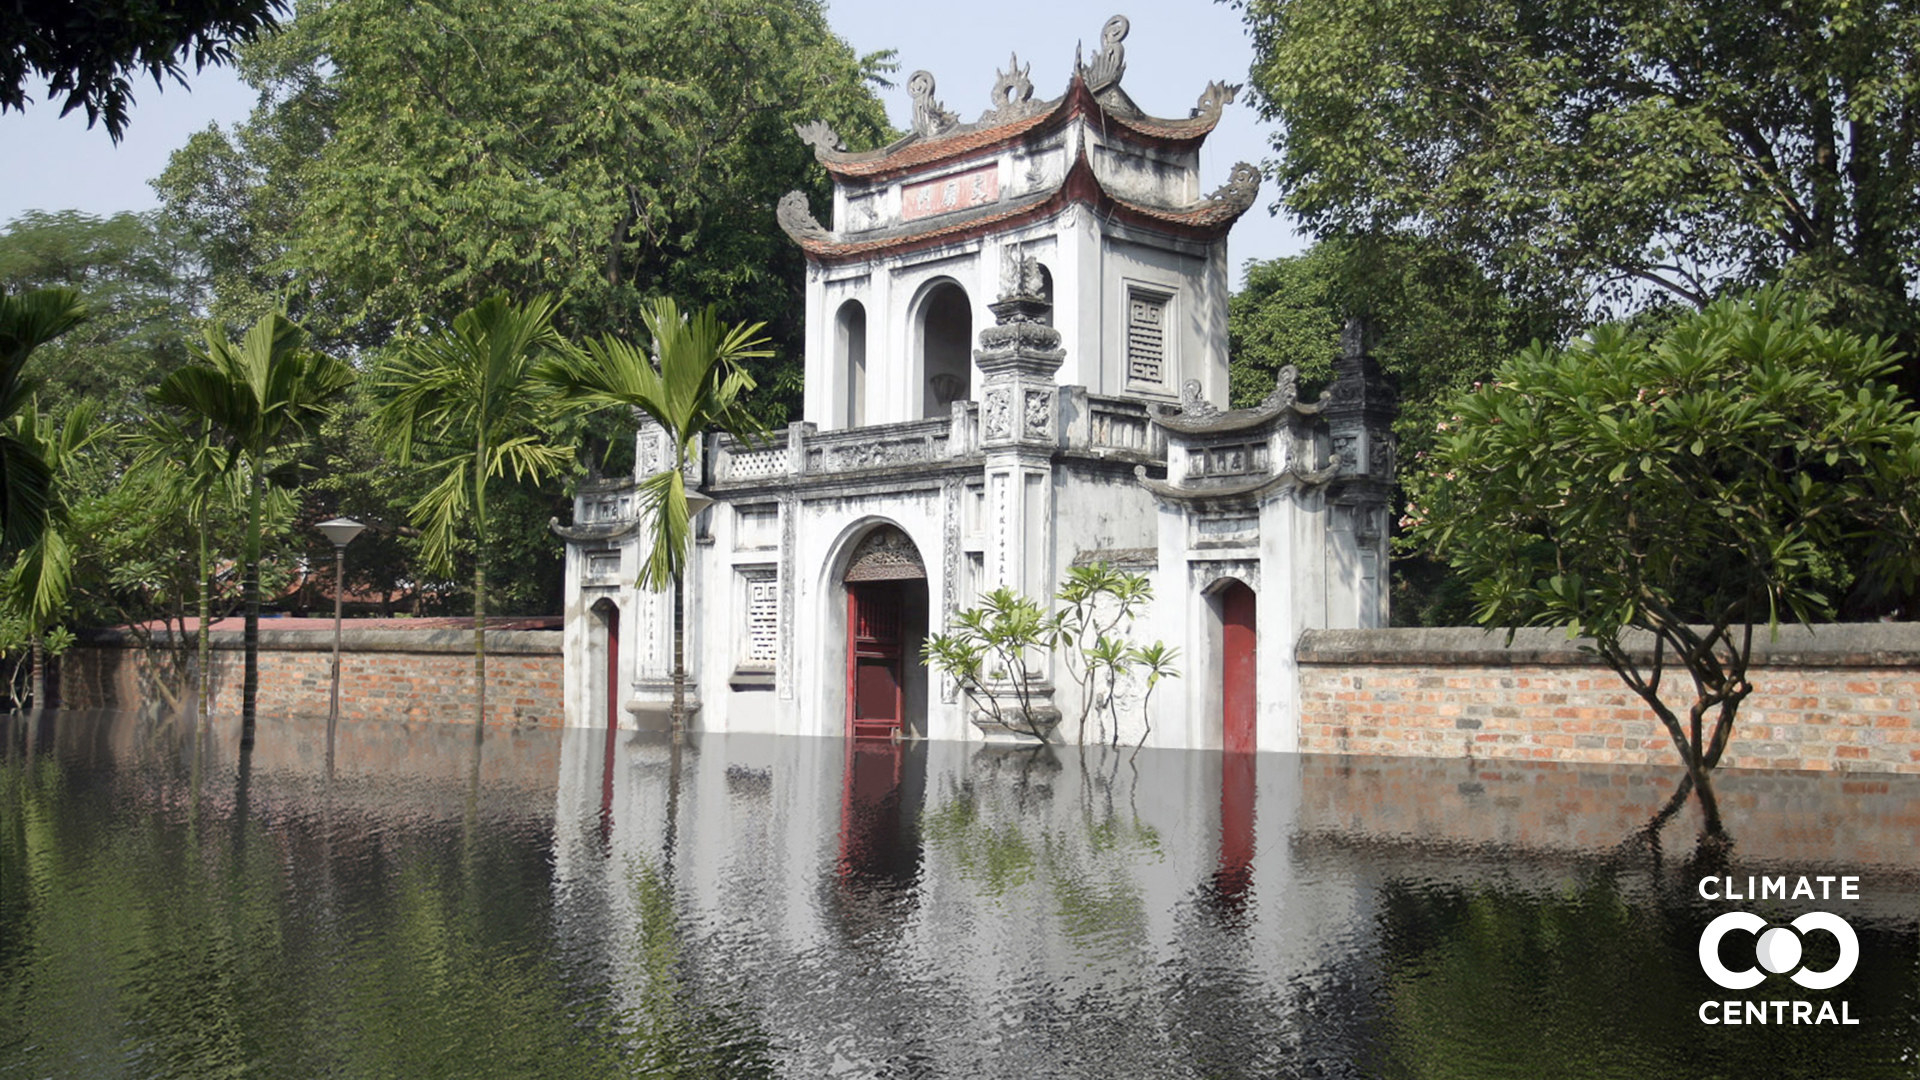 Part of the temple itself is underwater